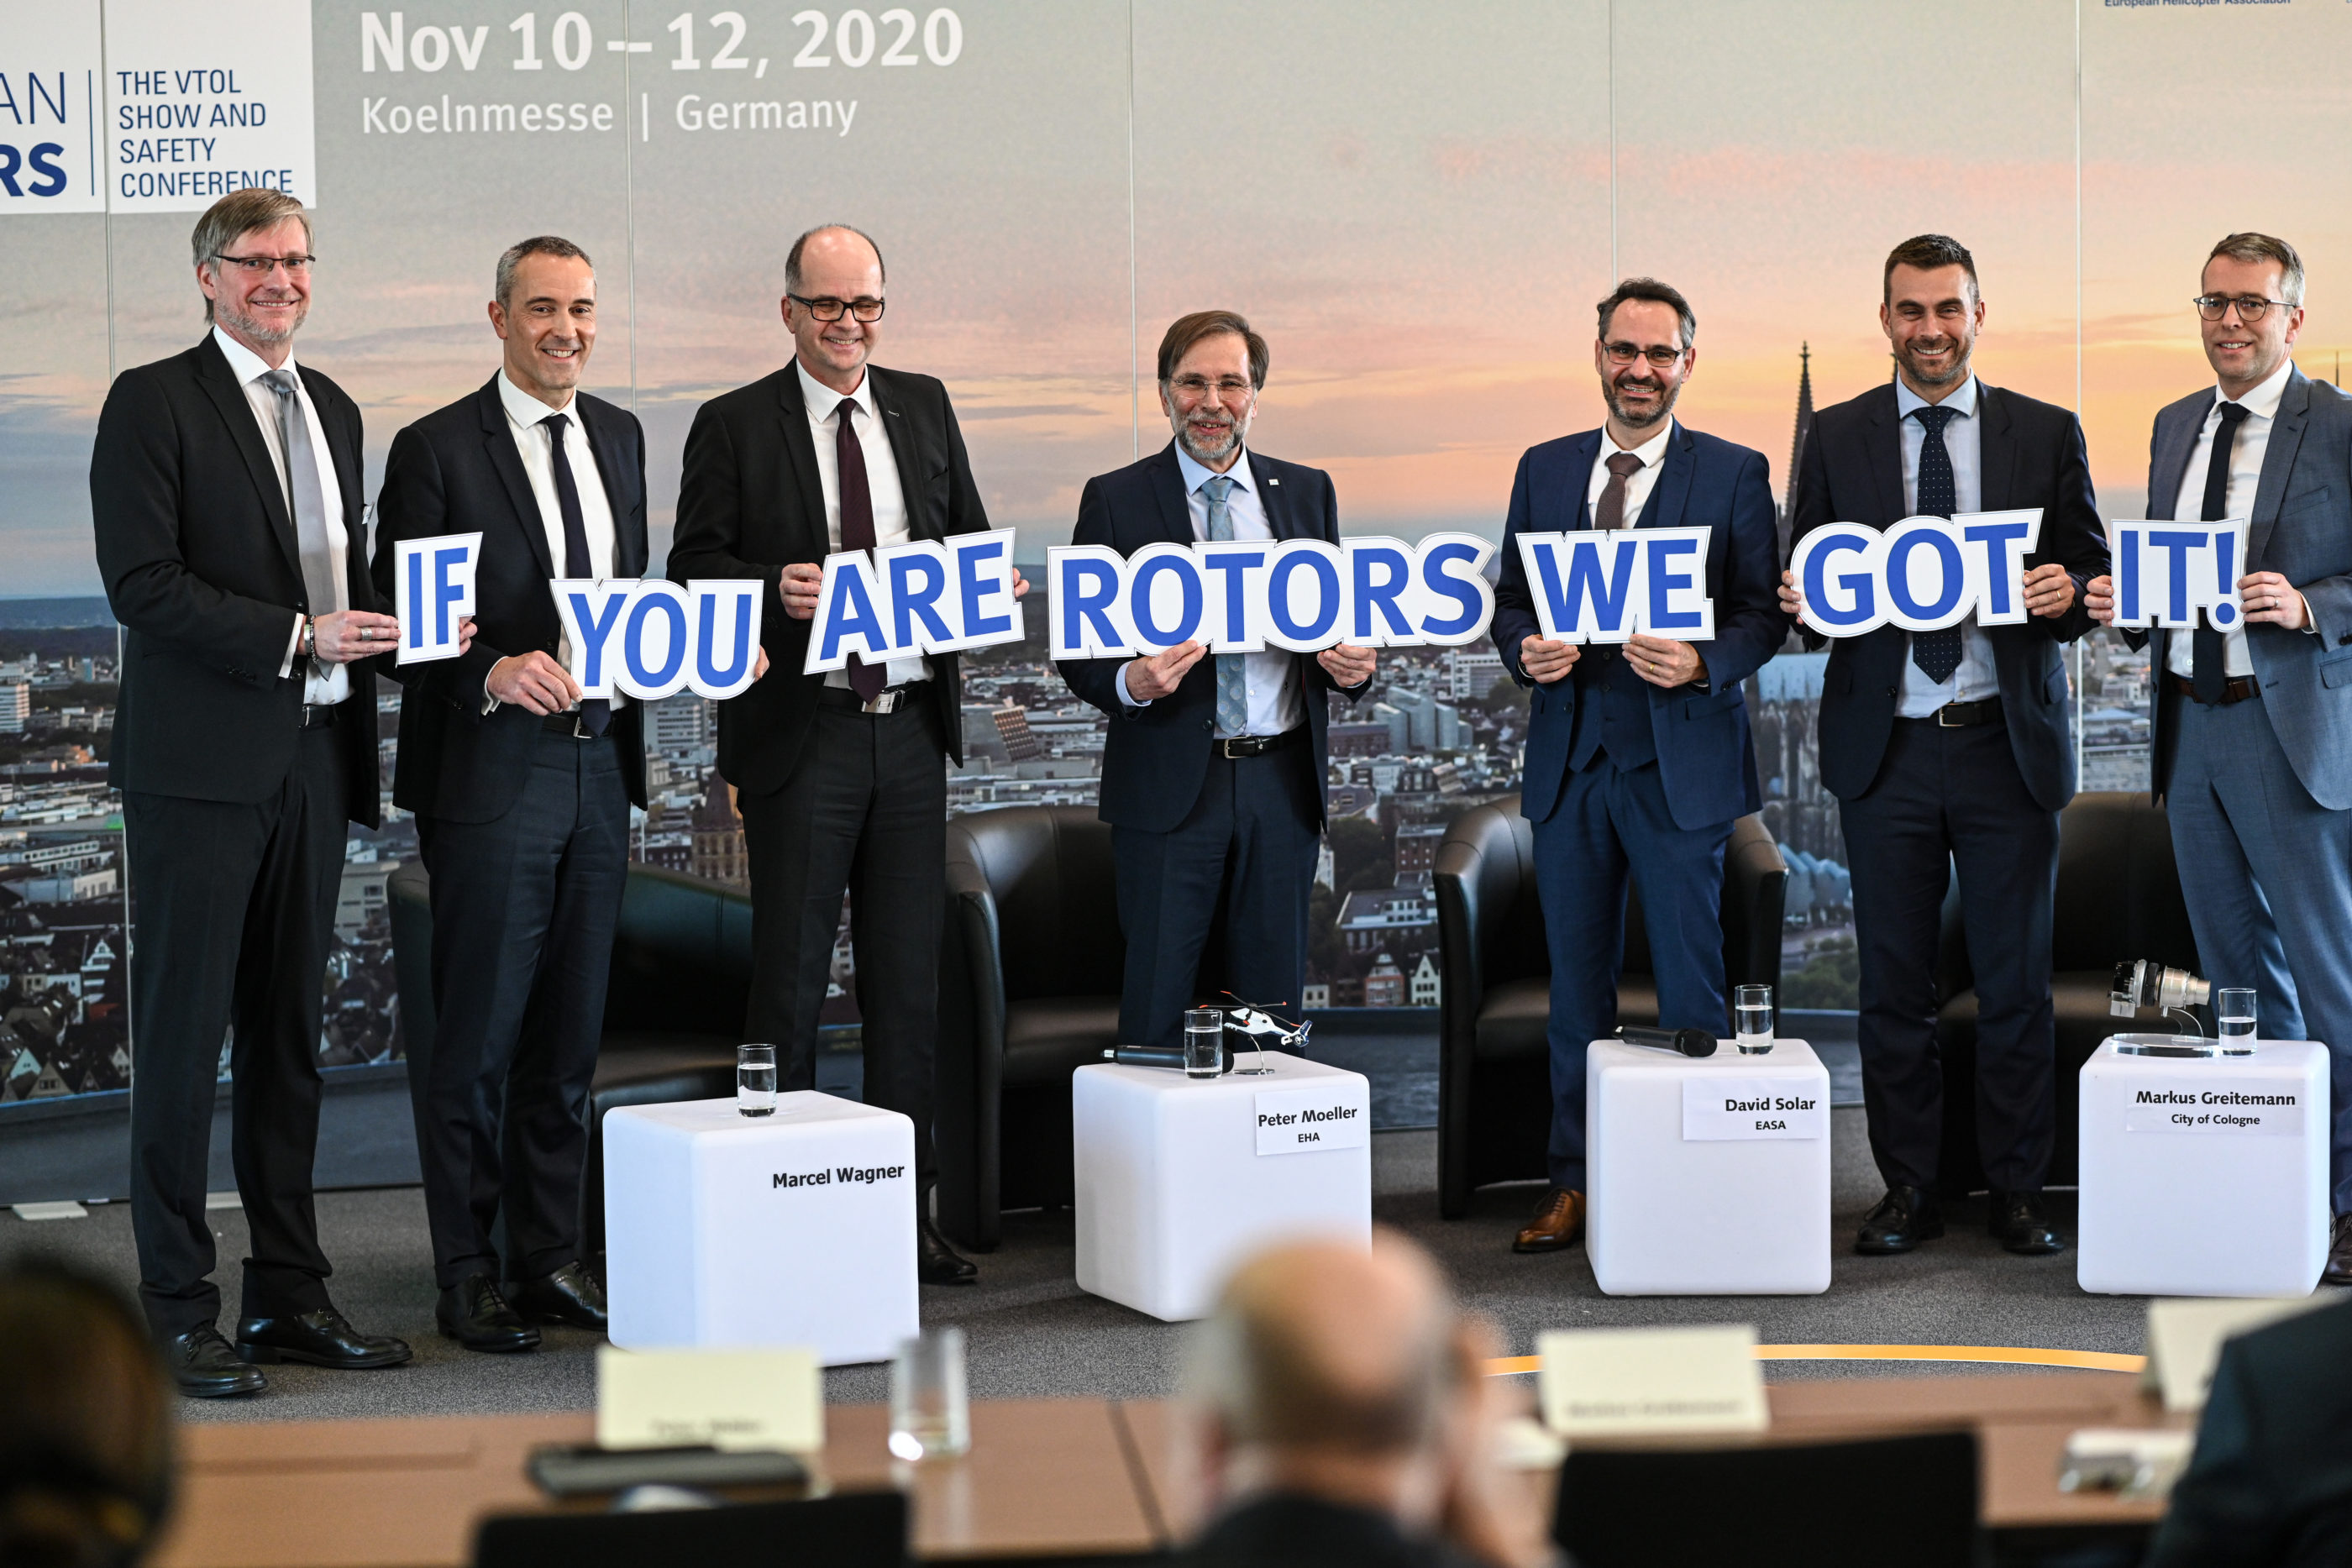 From left: Dr. Frank Liemandt (show manager of European Rotors), Luc Bentolila (Airbus VP marketing & sales development), Markus Greitemann (Commissioner of the City of Cologne for city development, construction and economy), Peter Moeller (chairman of the European Helicopter Association), David Solar (head of Rotorcraft and VTOL department, European Union Aviation Safety Agency), Patrick Moulay (Bell senior vice president, commercial business - International), and Francis Larribau (CEO of Safran Helicopter Engines Germany). European Rotors Photo